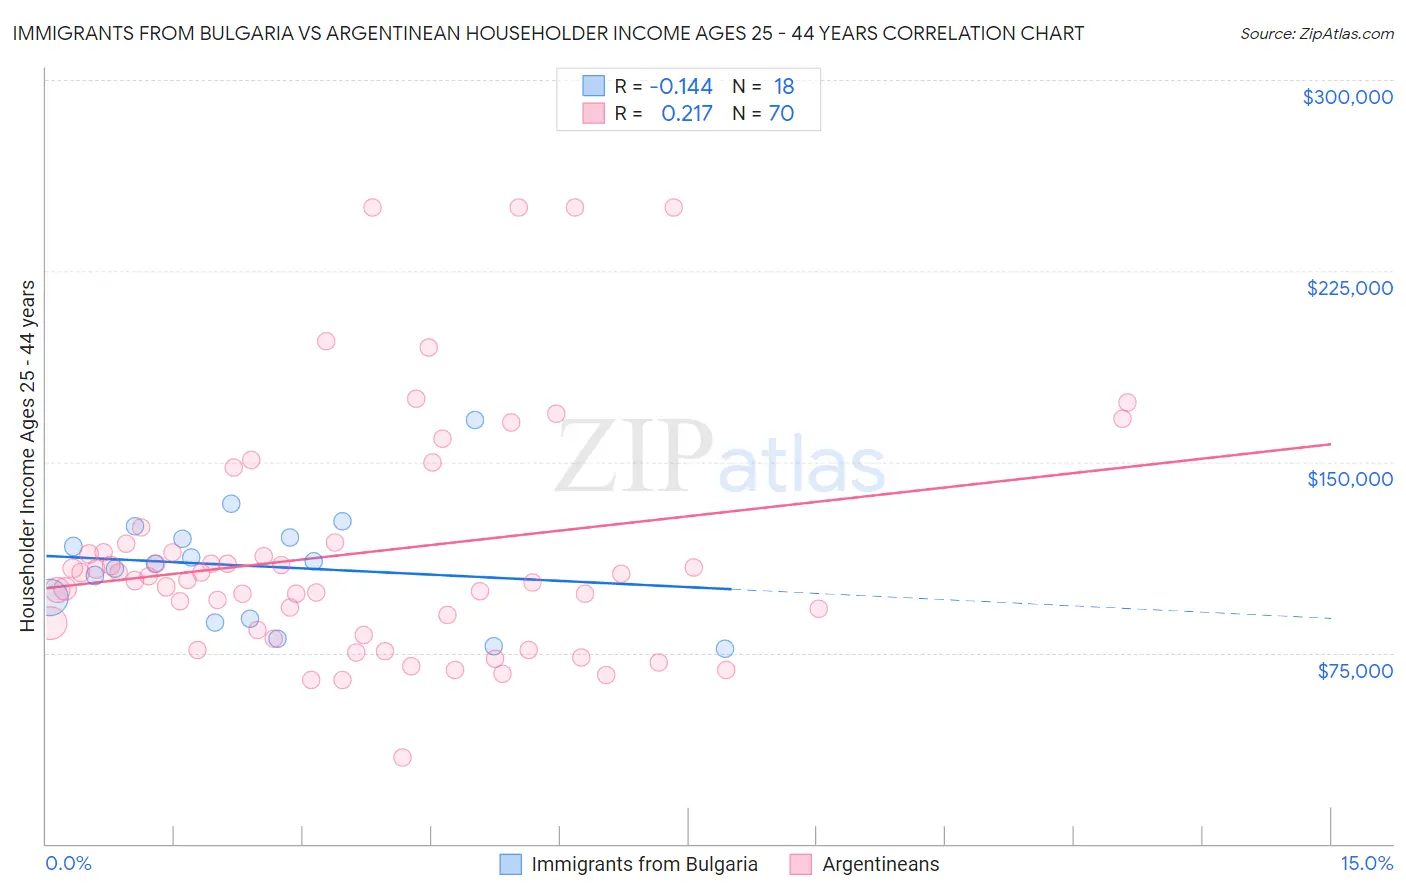 Immigrants from Bulgaria vs Argentinean Householder Income Ages 25 - 44 years